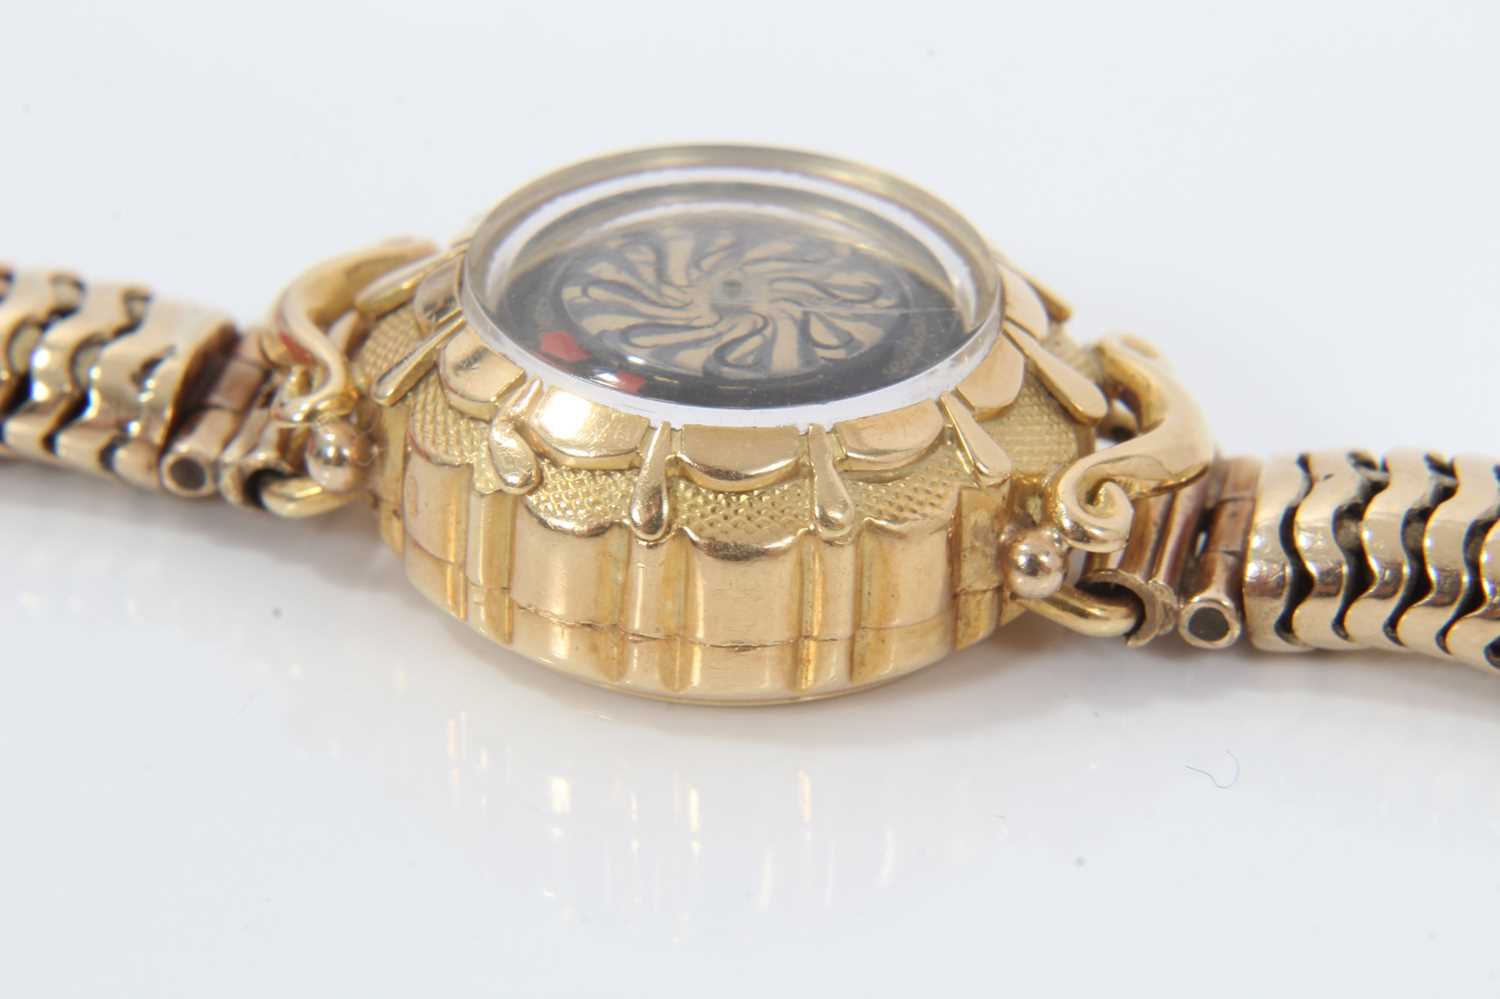 1950s/1960s ladies Ernest Borel gold cocktail wristwatch with ‘mystery’ dial in 18ct gold case on 9c - Image 6 of 8